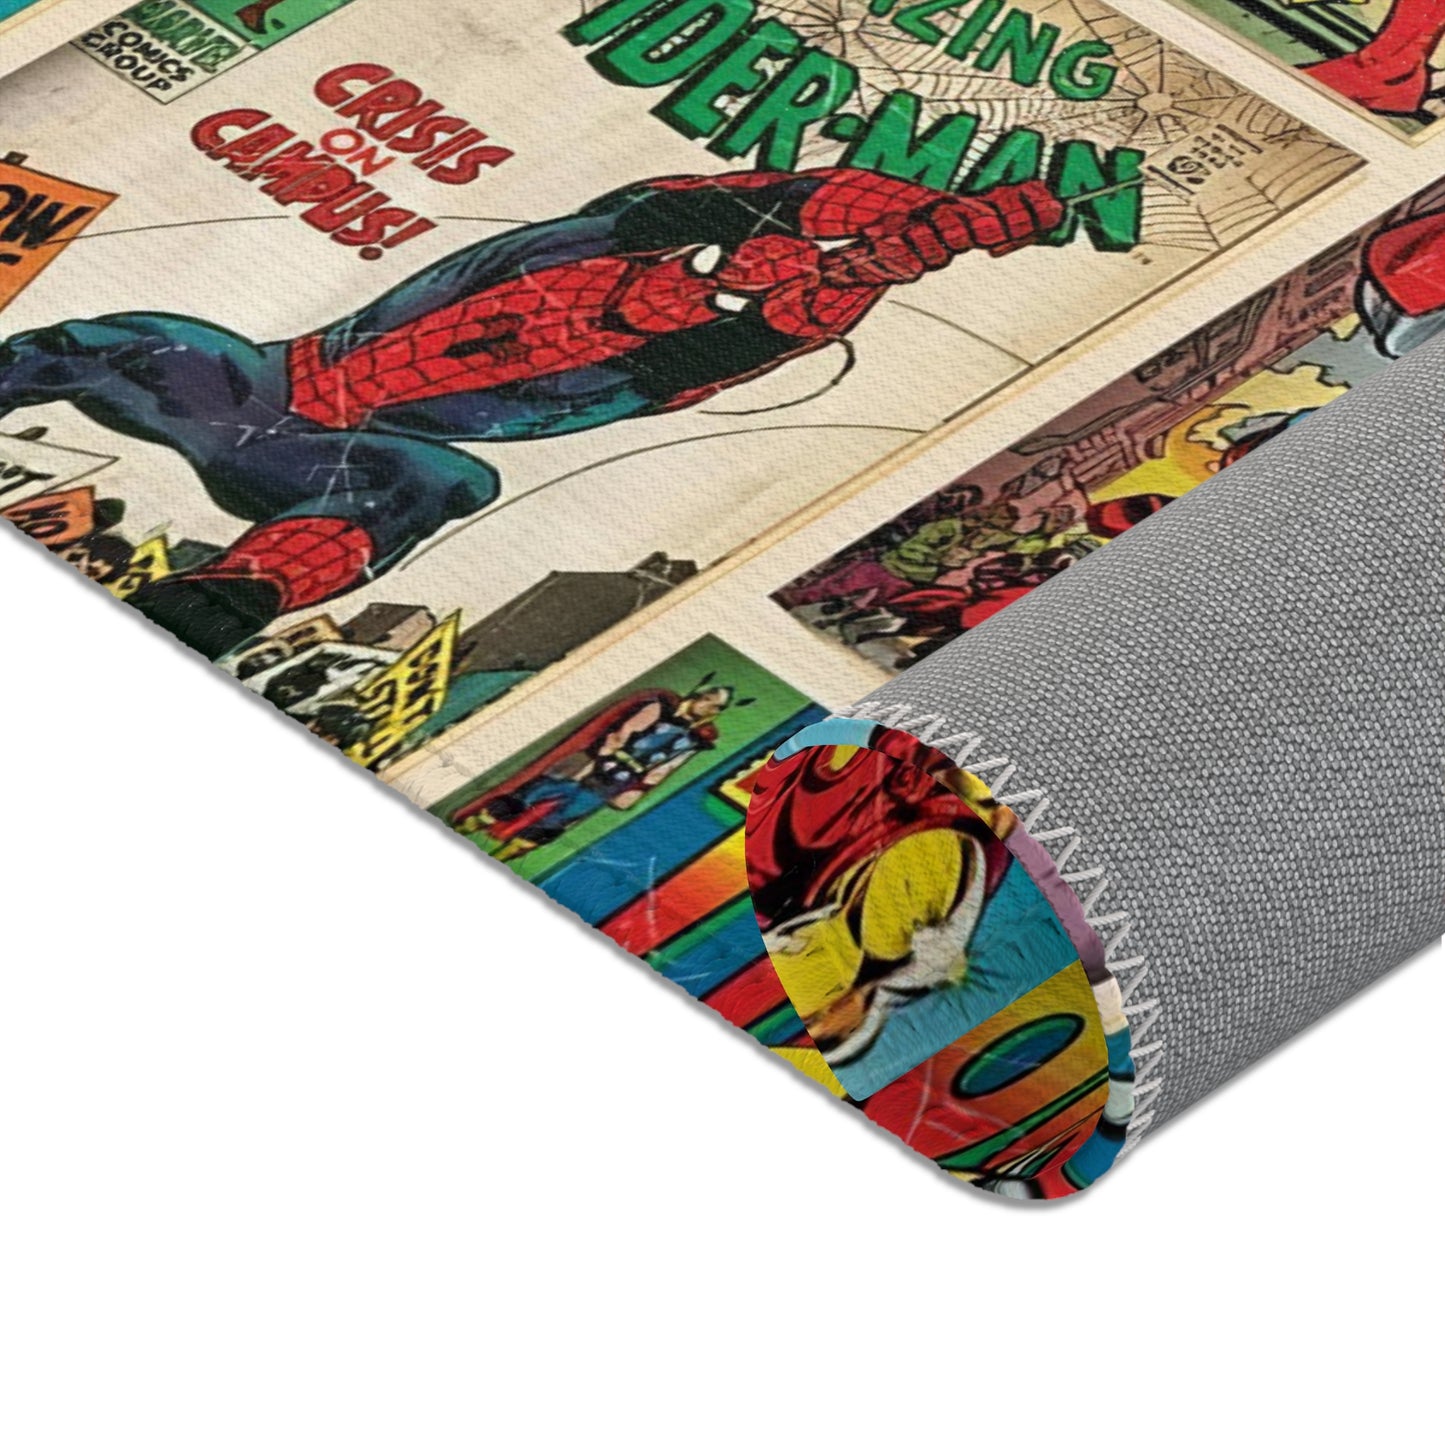 Marvel Comic Book Cover Collage Area Rug